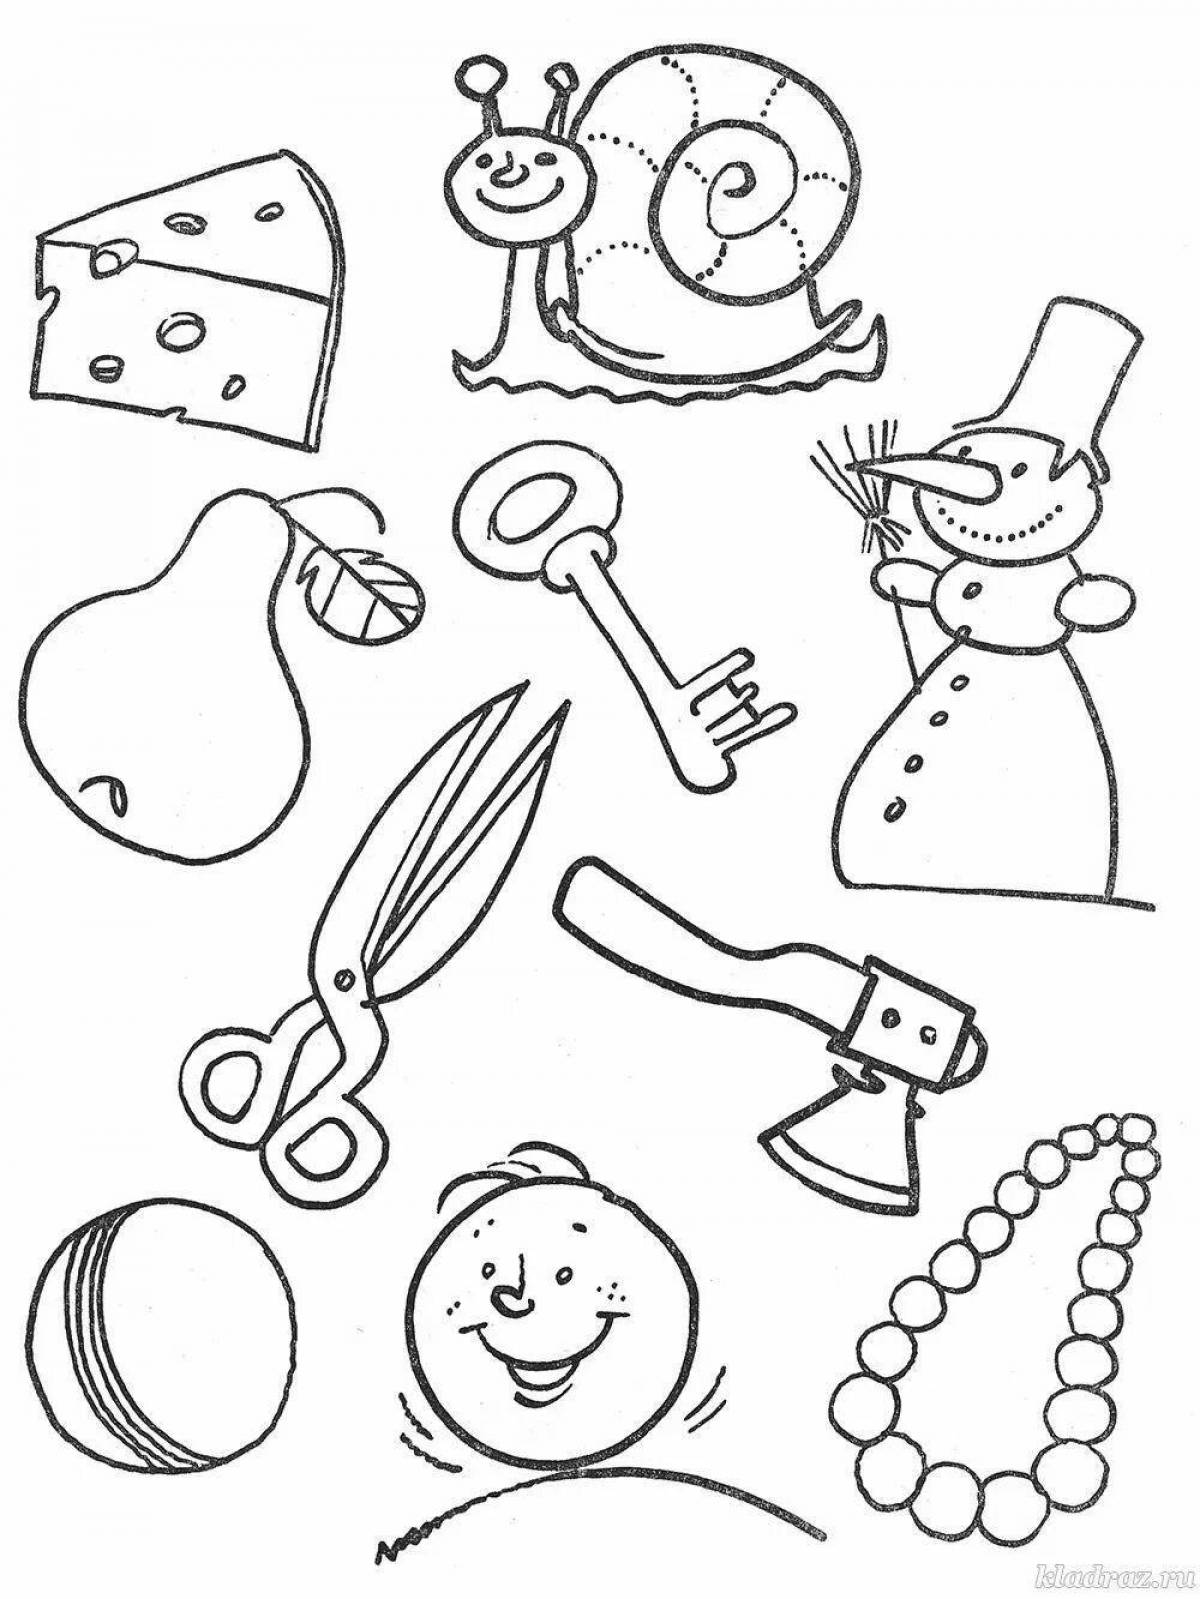 Colorful and amazing coloring pages for kids